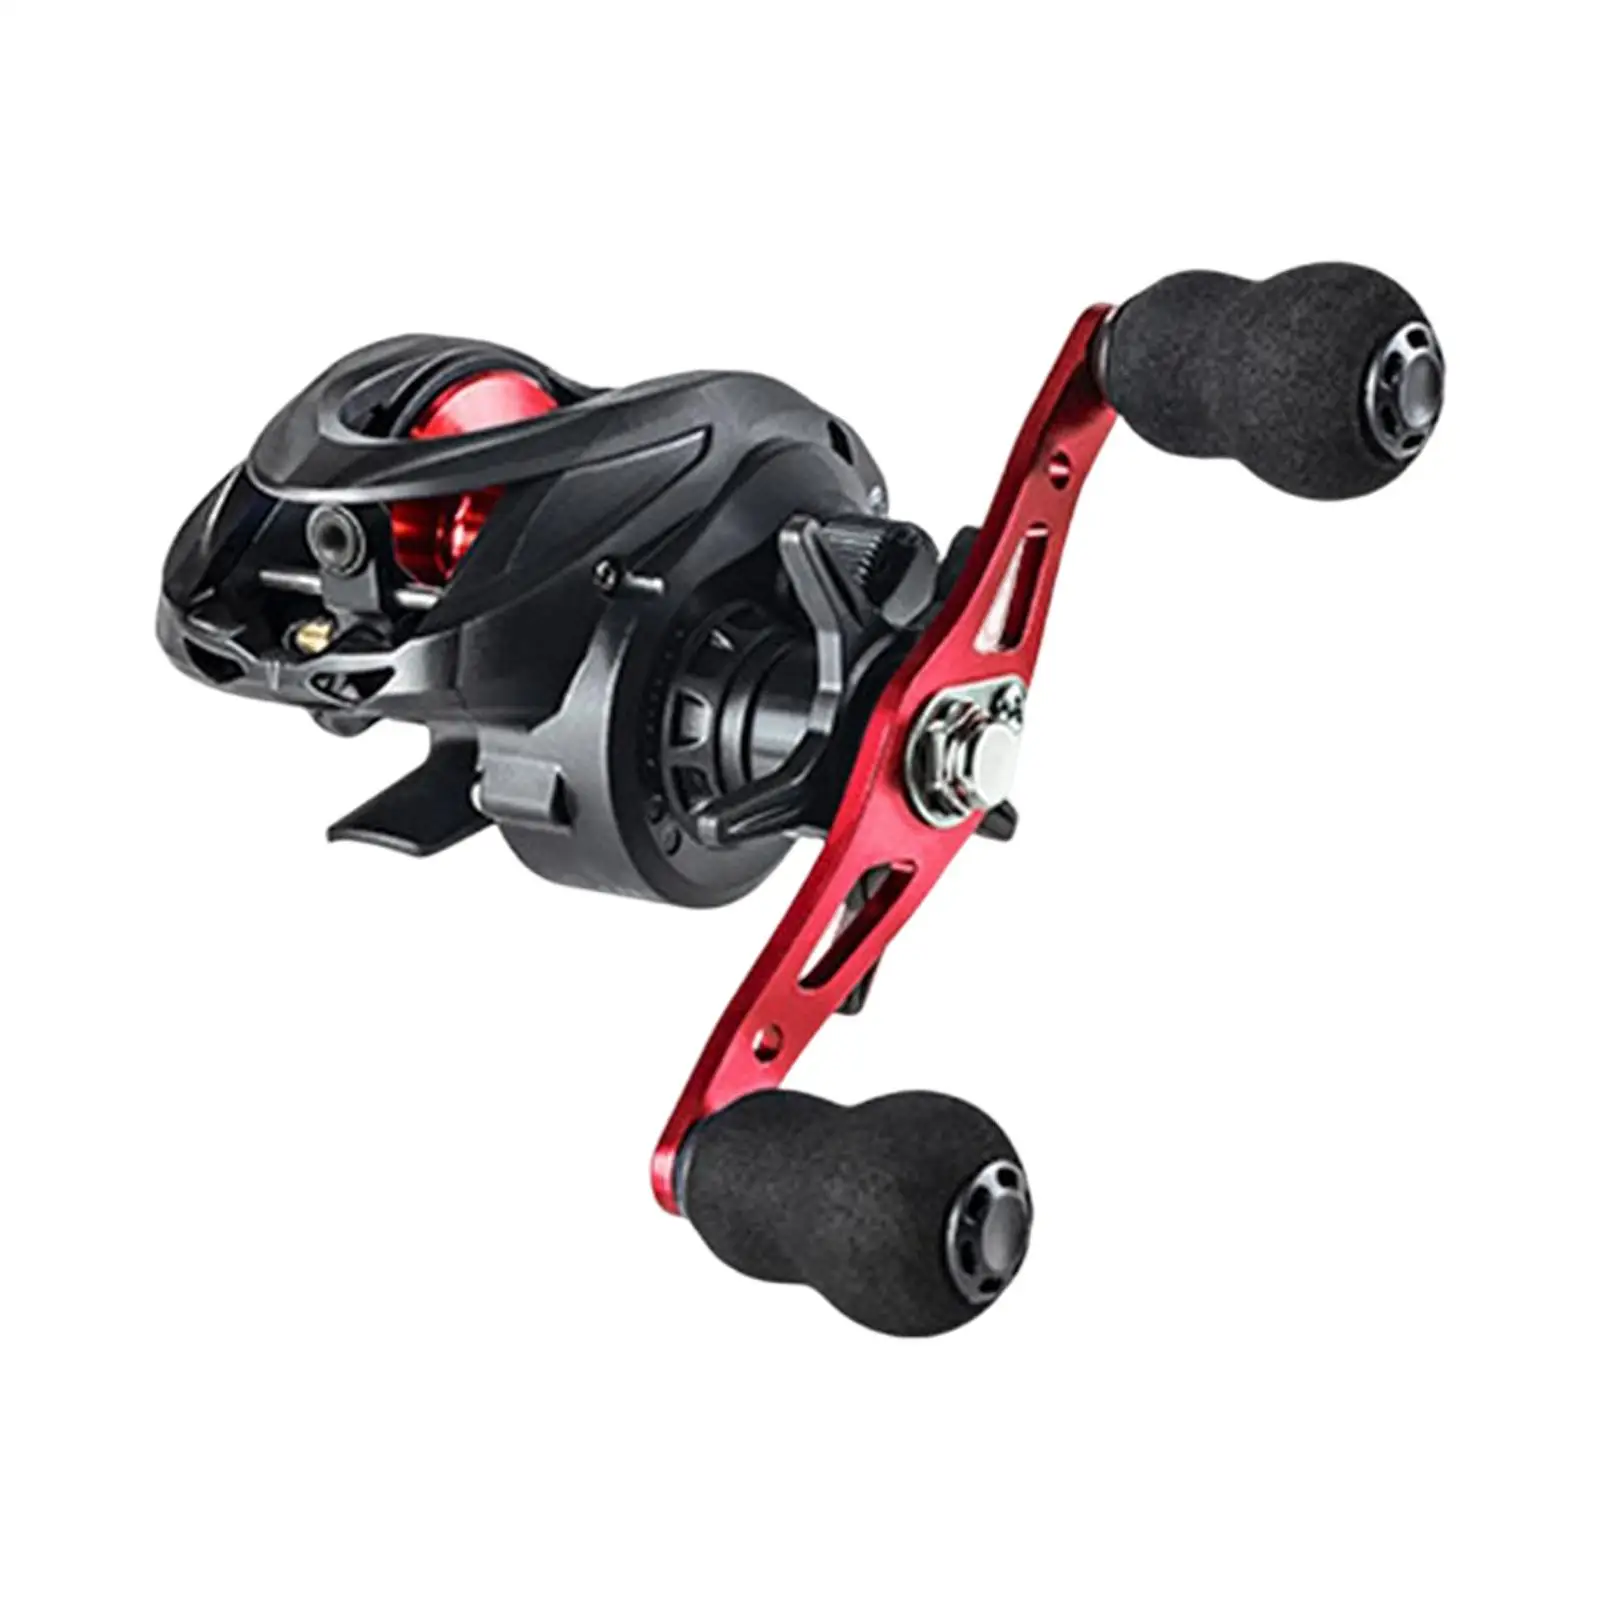 Classic Baitcasting Fishing Reel 6.3:1 Ratio Baitcaster L/R Hand Saltwater for Freshwater Ice Fishing Saltwater